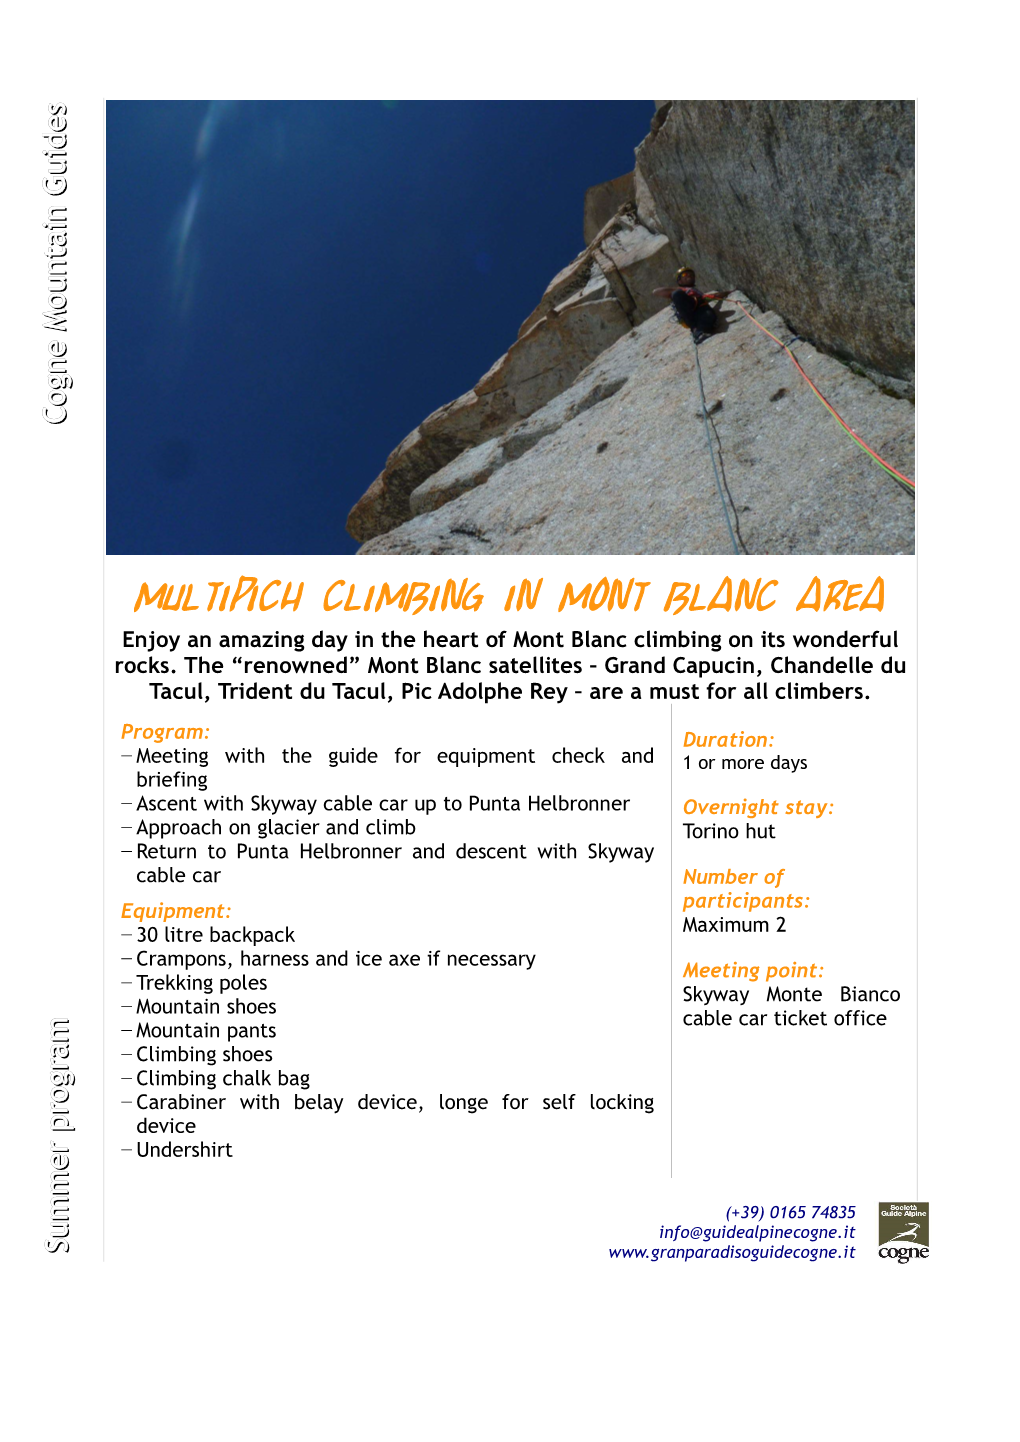 Multipitch Climbing in Mont Blanc Area